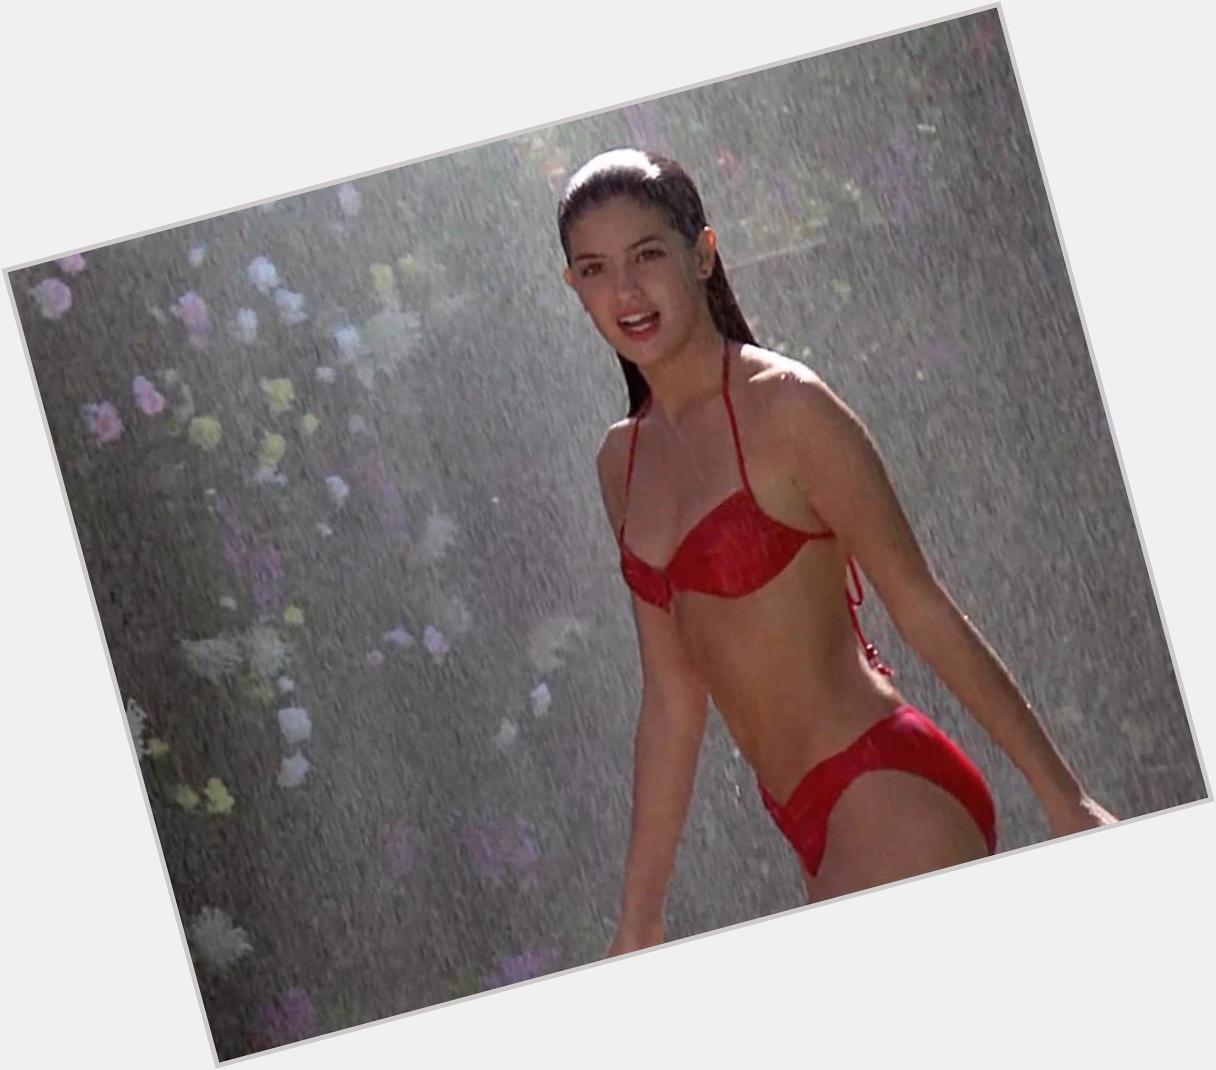 Happy birthday Phoebe Cates. This scene from Fast Times at Ridgemont High is burned in my memory forever. 